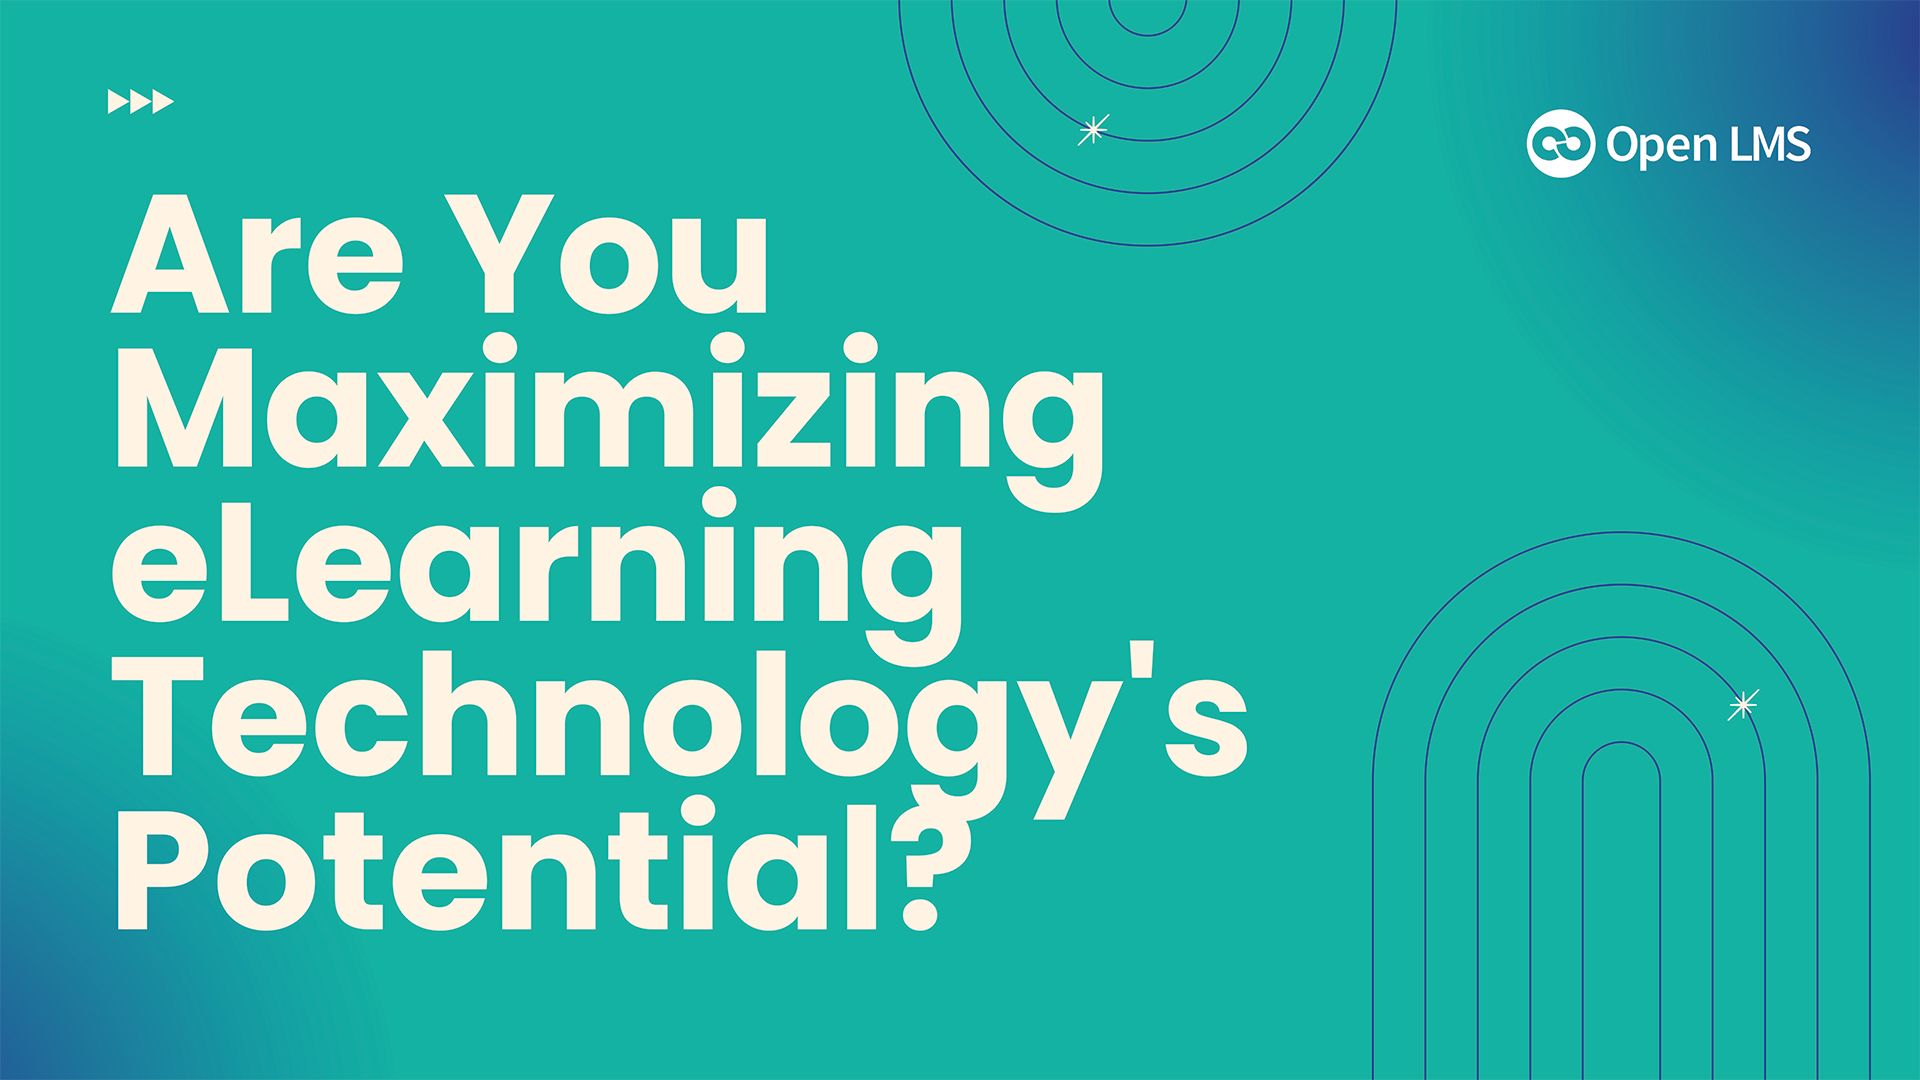 Are You Maximizing eLearning Technology's Potential? A Q&A With Open LMS Project Manager, Jorge Vela